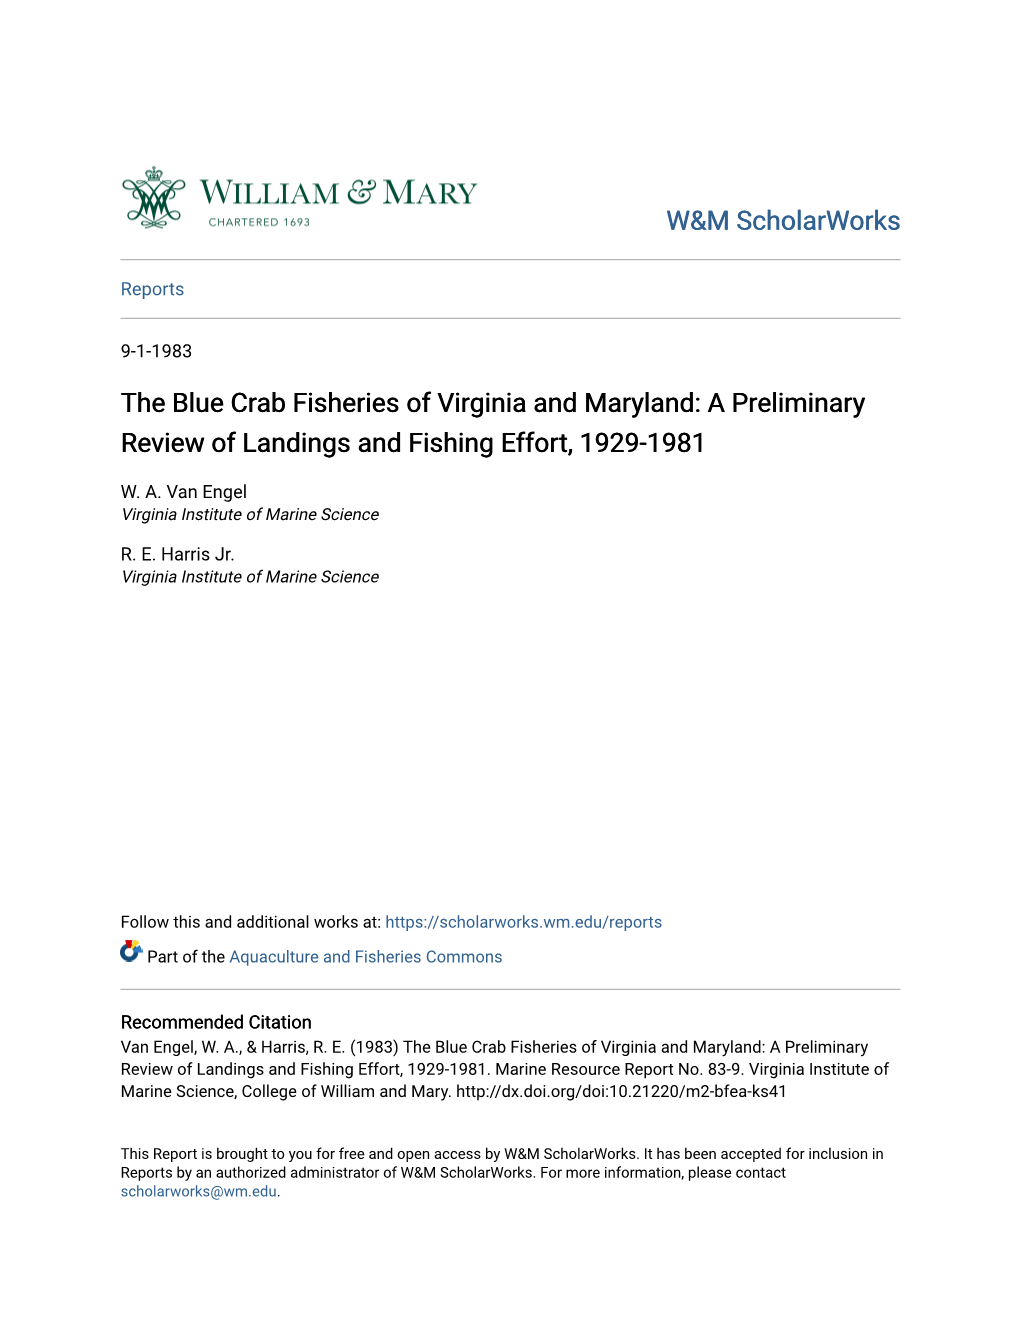 The Blue Crab Fisheries of Virginia and Maryland: a Preliminary Review of Landings and Fishing Effort, 1929-1981